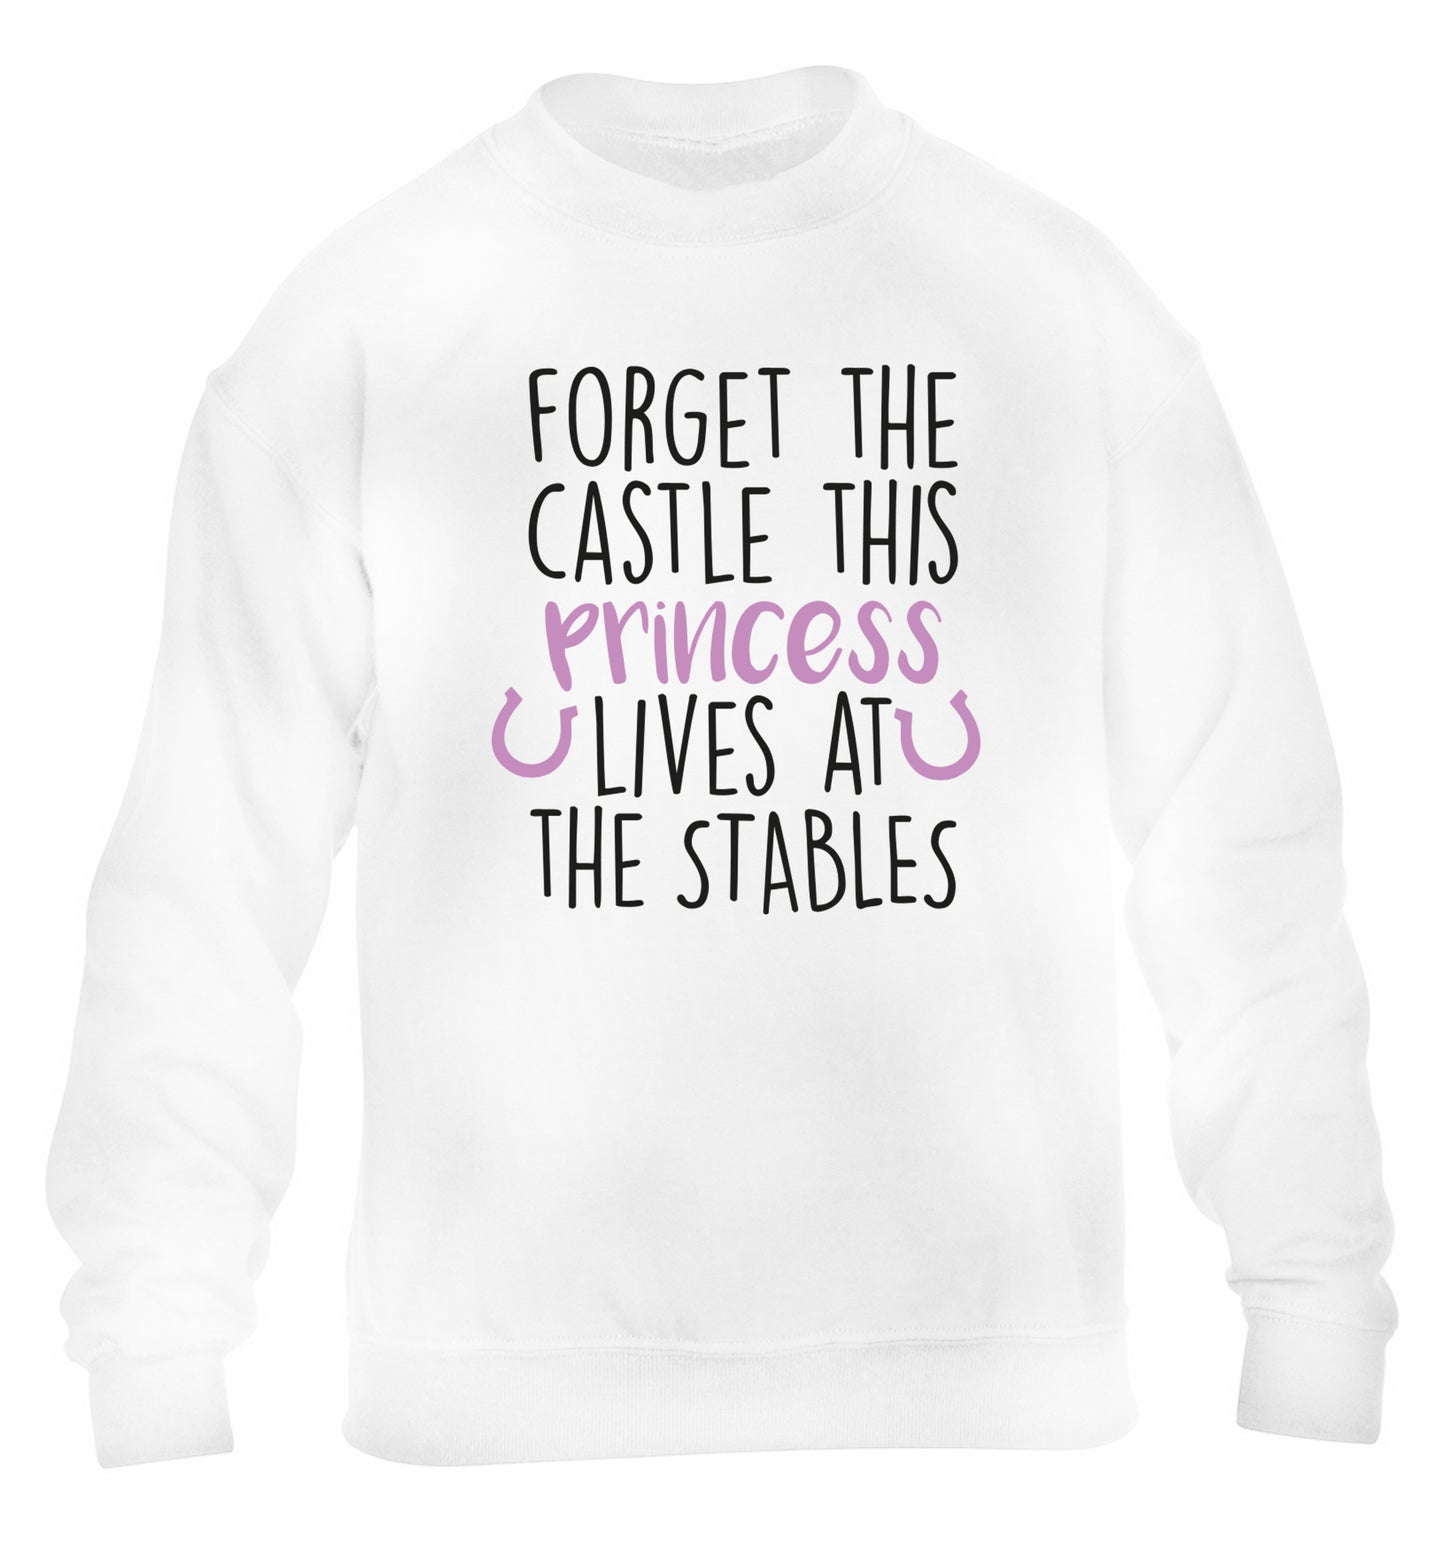 Forget the castle this princess lives at the stables children's white sweater 12-14 Years